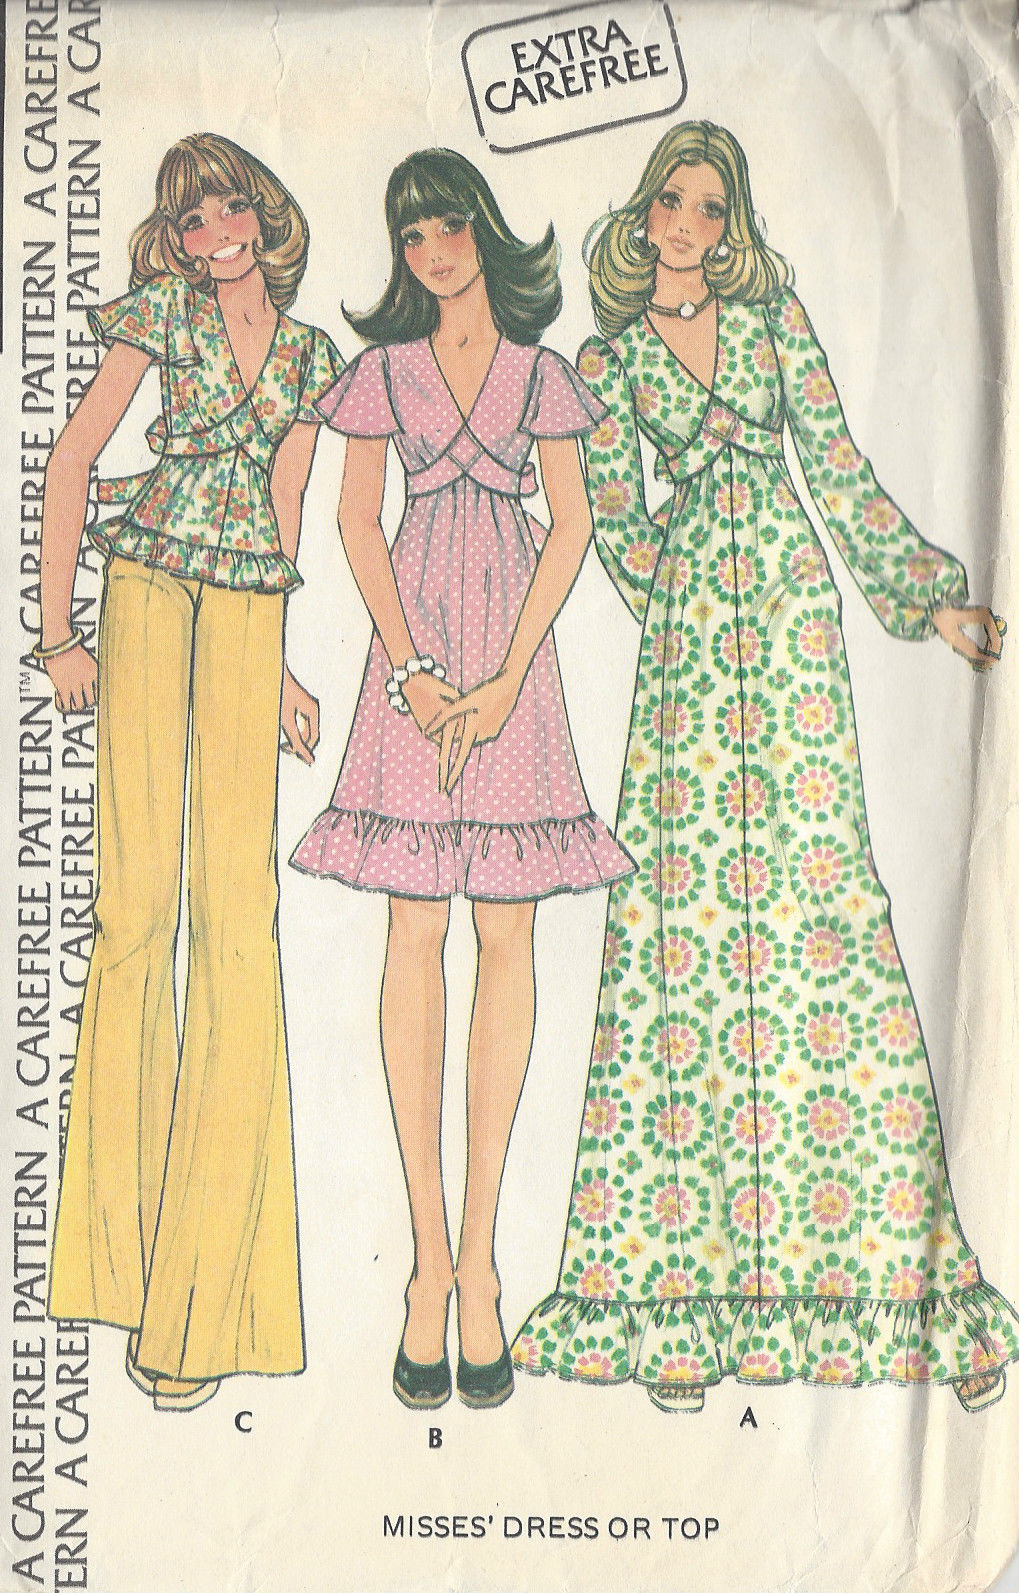 1974 Mccall's Sewing Pattern 4373 Misses Empire Waist 